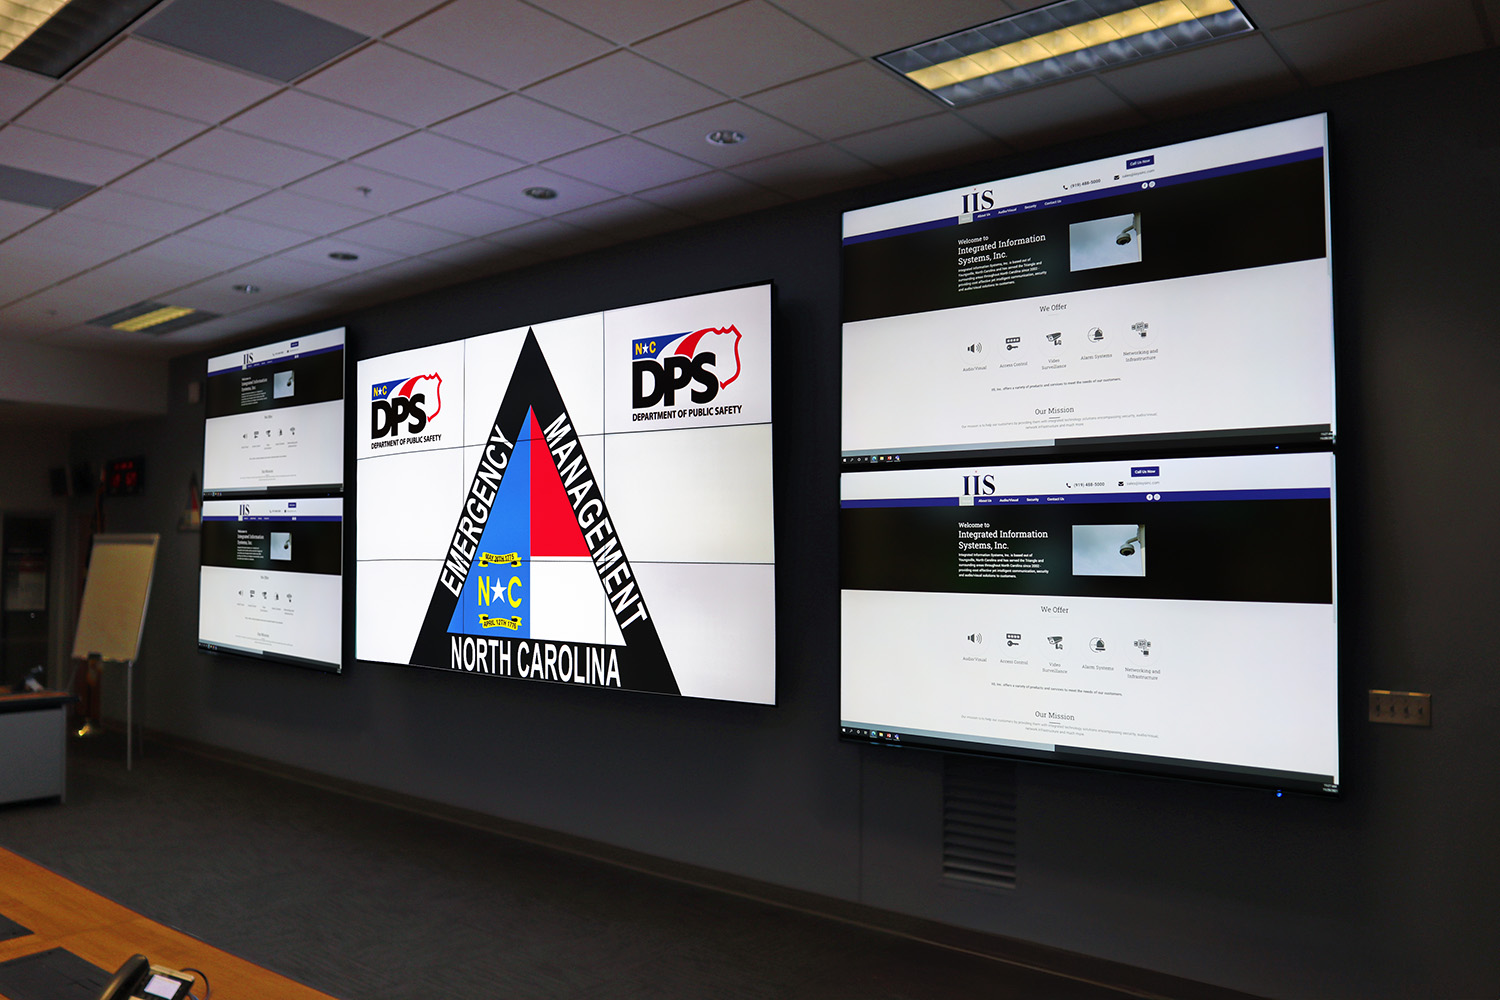 Thumbnail - The Situation Room in the North Carolina EOC provides multiple displays, including a 3x3 videowall flanked by 96" displays.